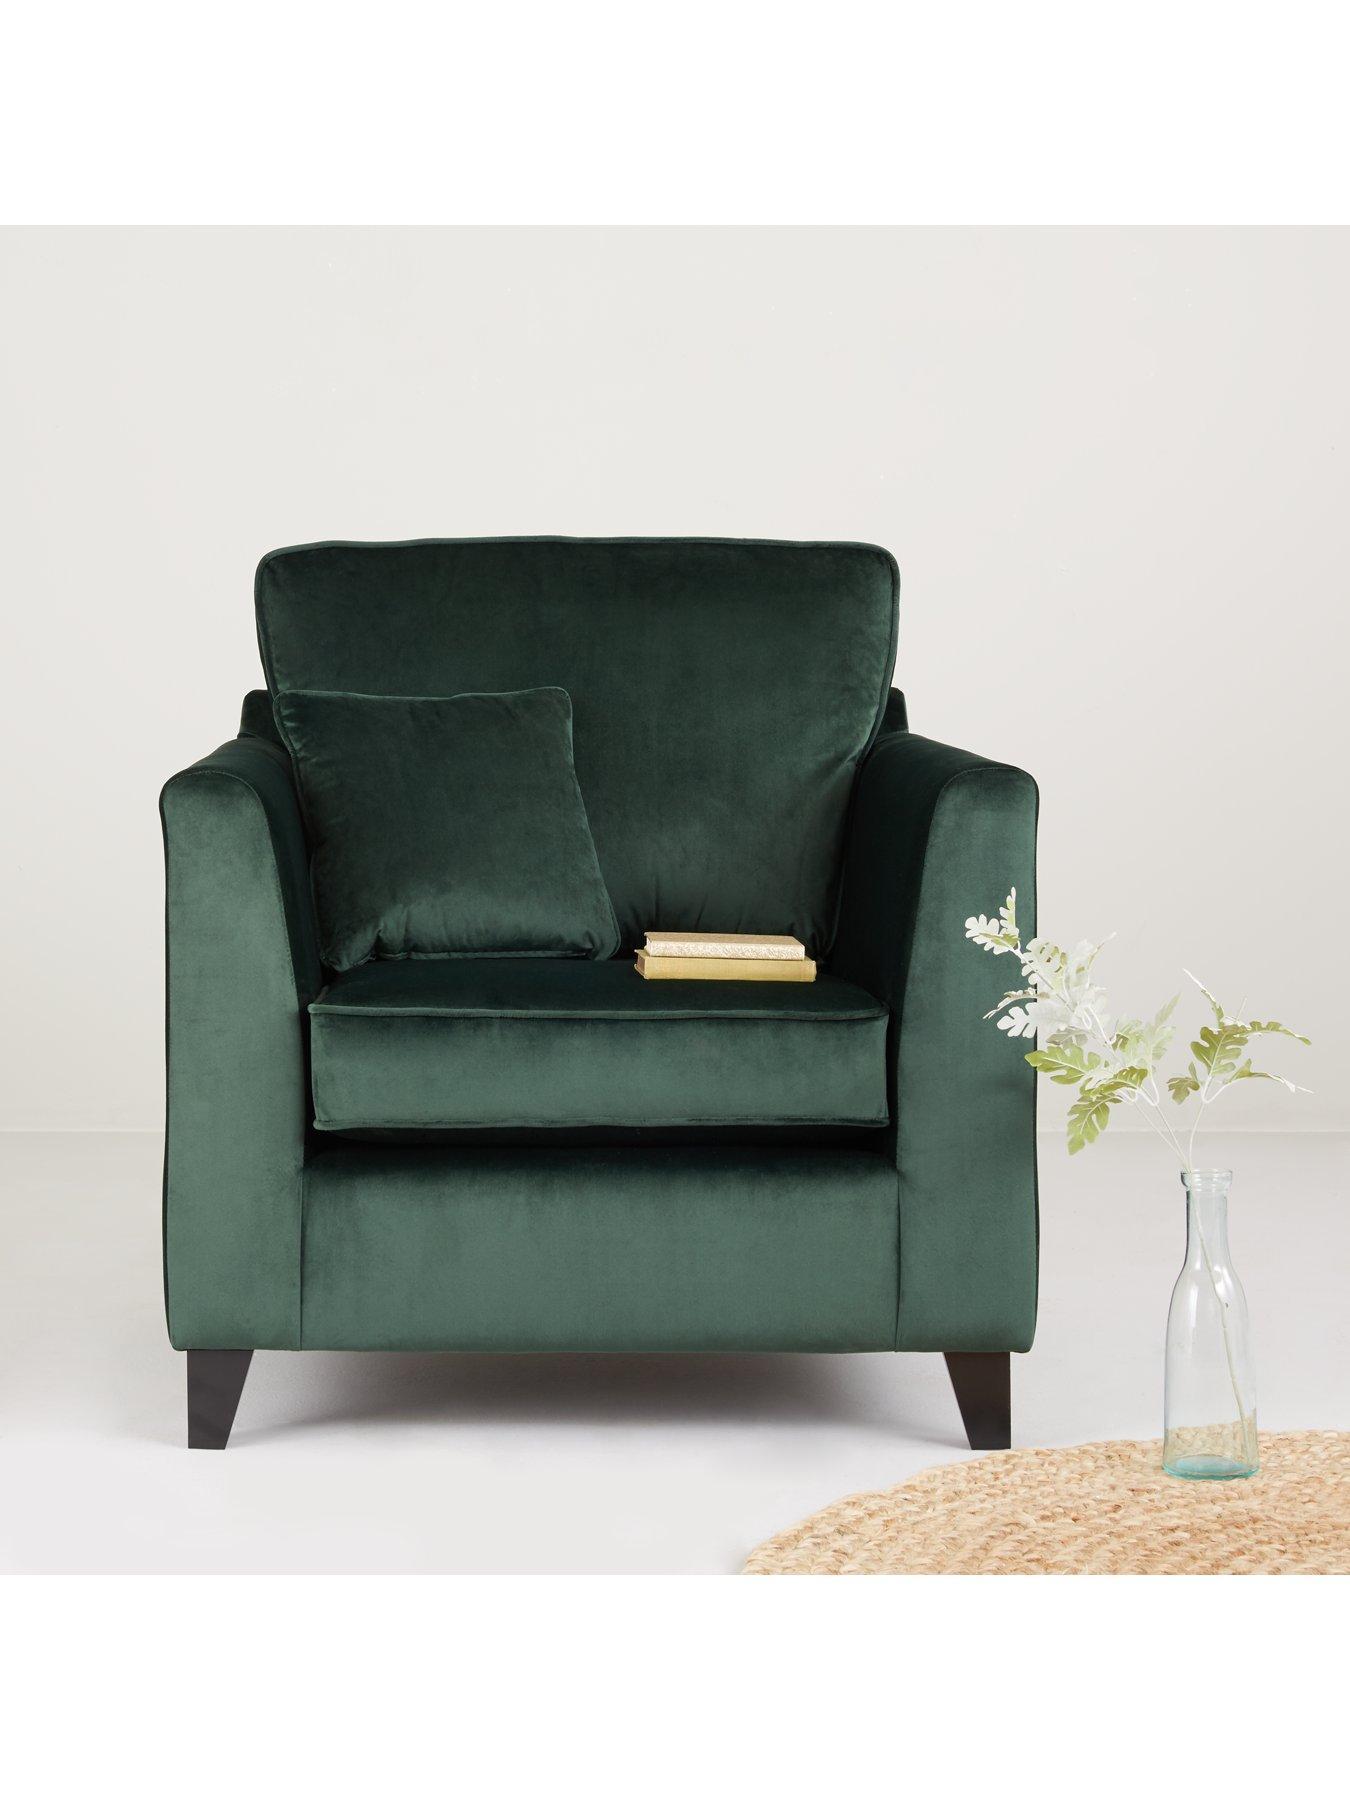 Green velvet armchair - home accessories inspiration| Today we're talking inspiration for adding green to your living room. Green is a really versatile colour to decorate your home with. But, which colours and tones work well? What kind of accessories work with green? This post gives you ideas for pulling together an elegant green colour palette and pieces for your home. Read more: kittyandb.com #greenlivingroom #greenaccessories #greencolorpalette #interiordecoratinginspiration #greenaesthetic #greenarmchair